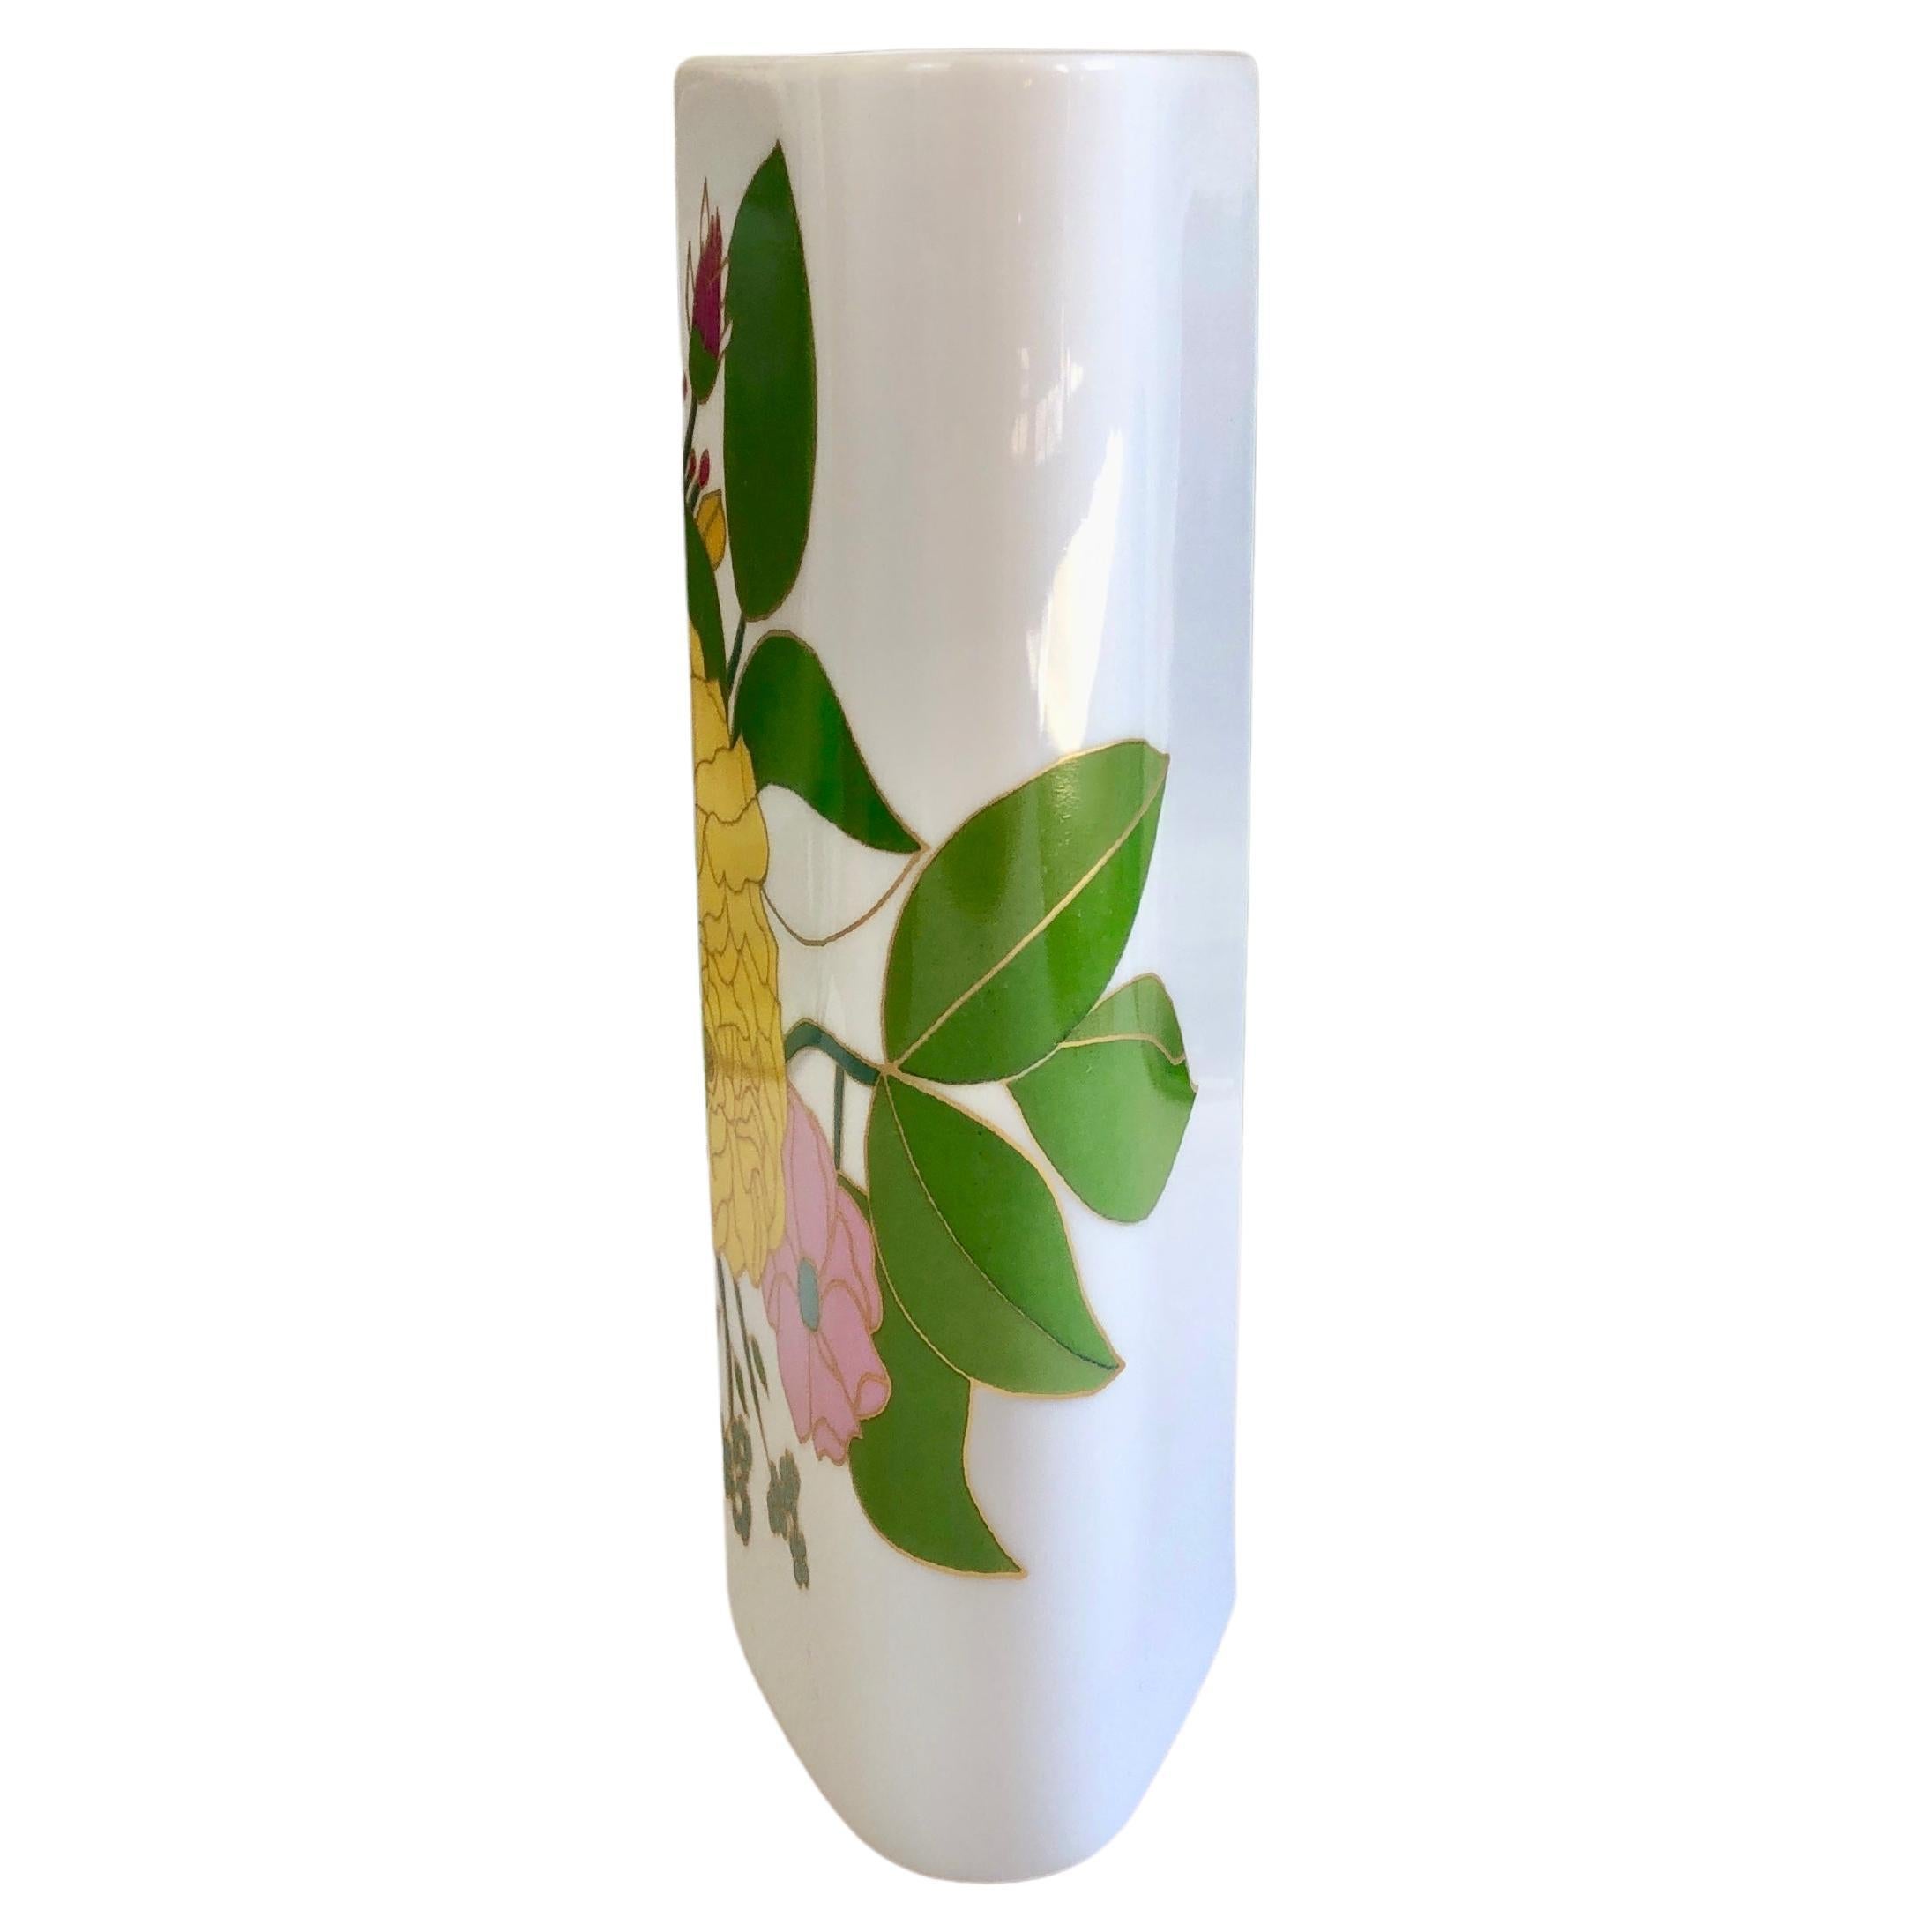 Abstract Floral Vase Rosenthal Studio-Line, by Wolfgang Bauer 1970s, Germany In Good Condition For Sale In Andernach, DE